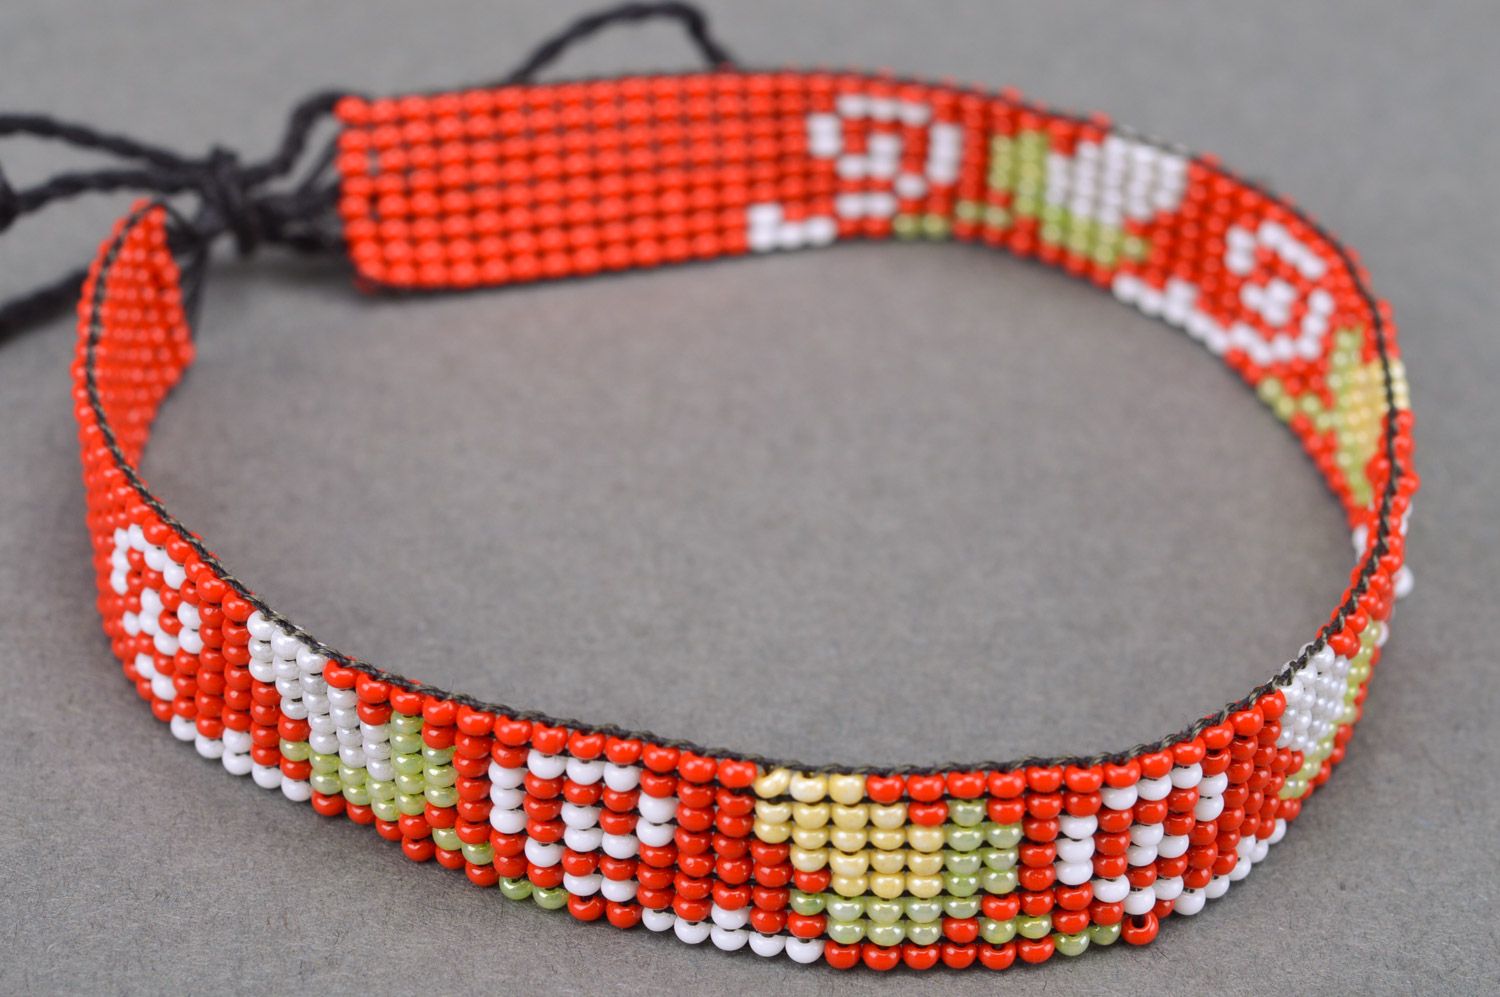 Handmade red bead woven necklace with ties and floral ornaments for women photo 2